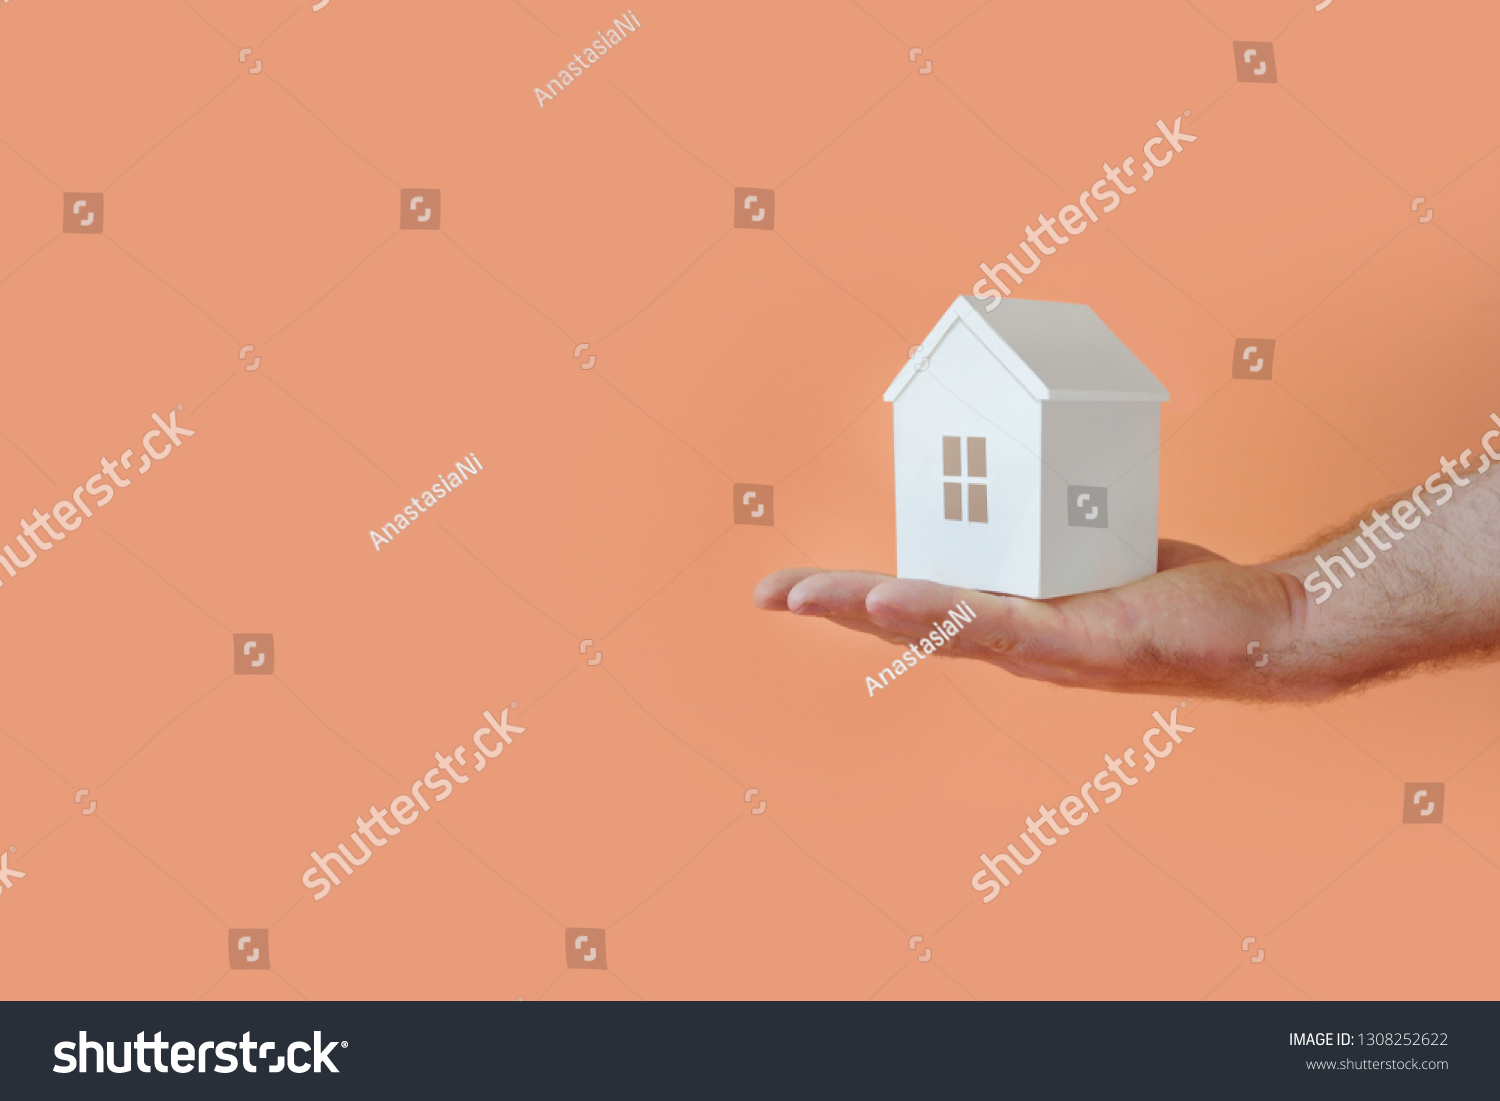 Male hand with model house. Copy space. Living coral #1308252622